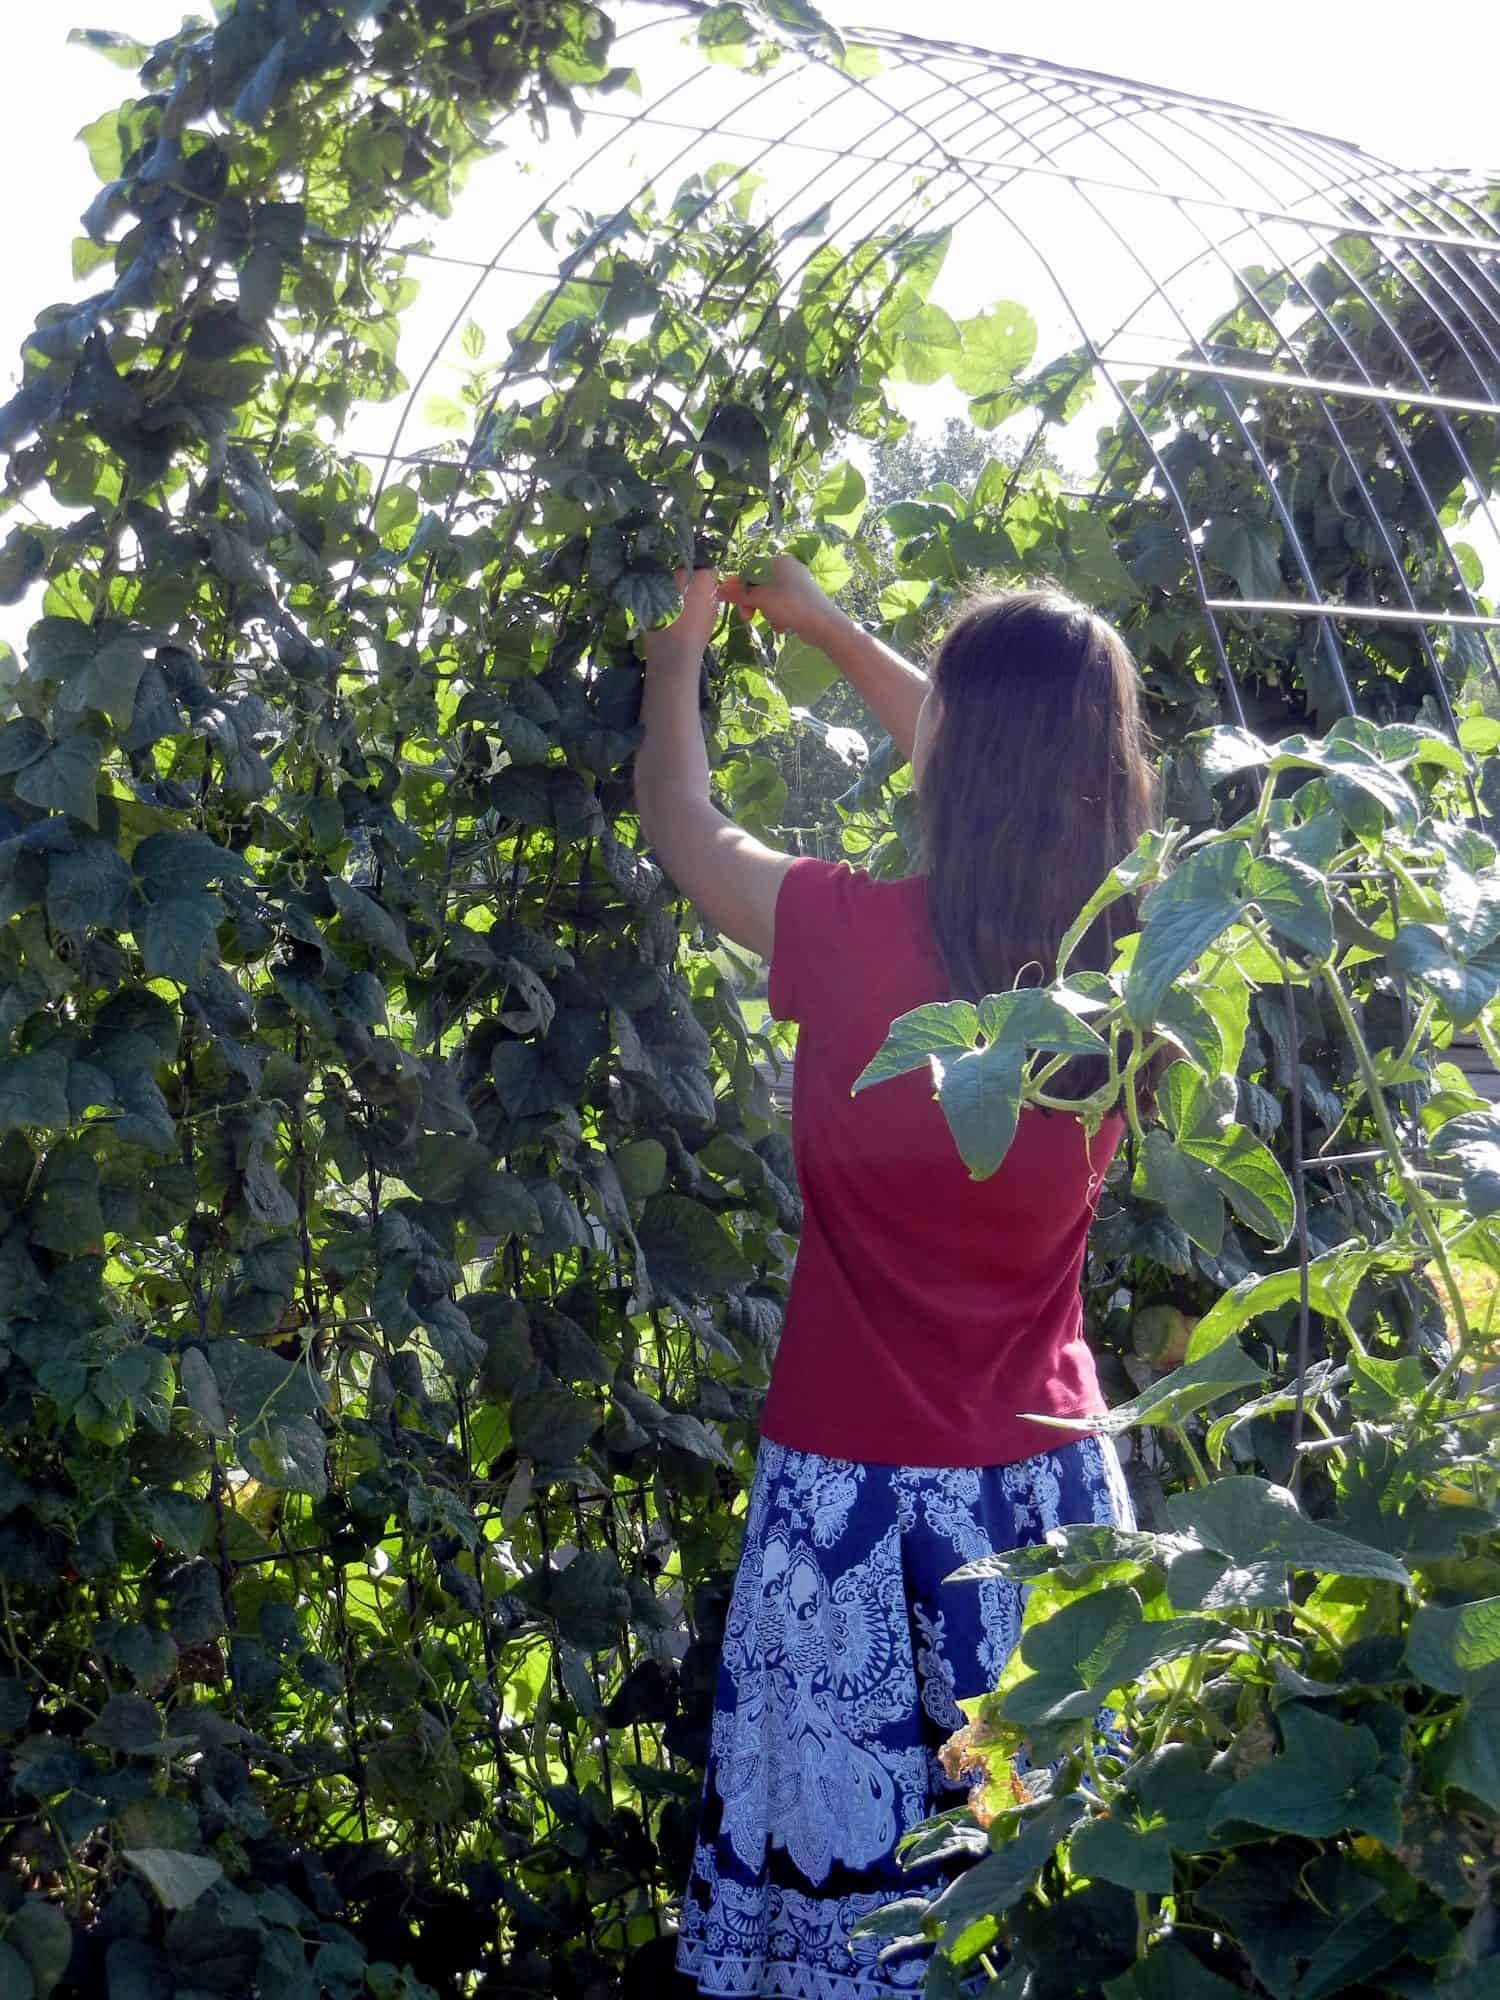 Our daughter picking green beans in the kitchen garden